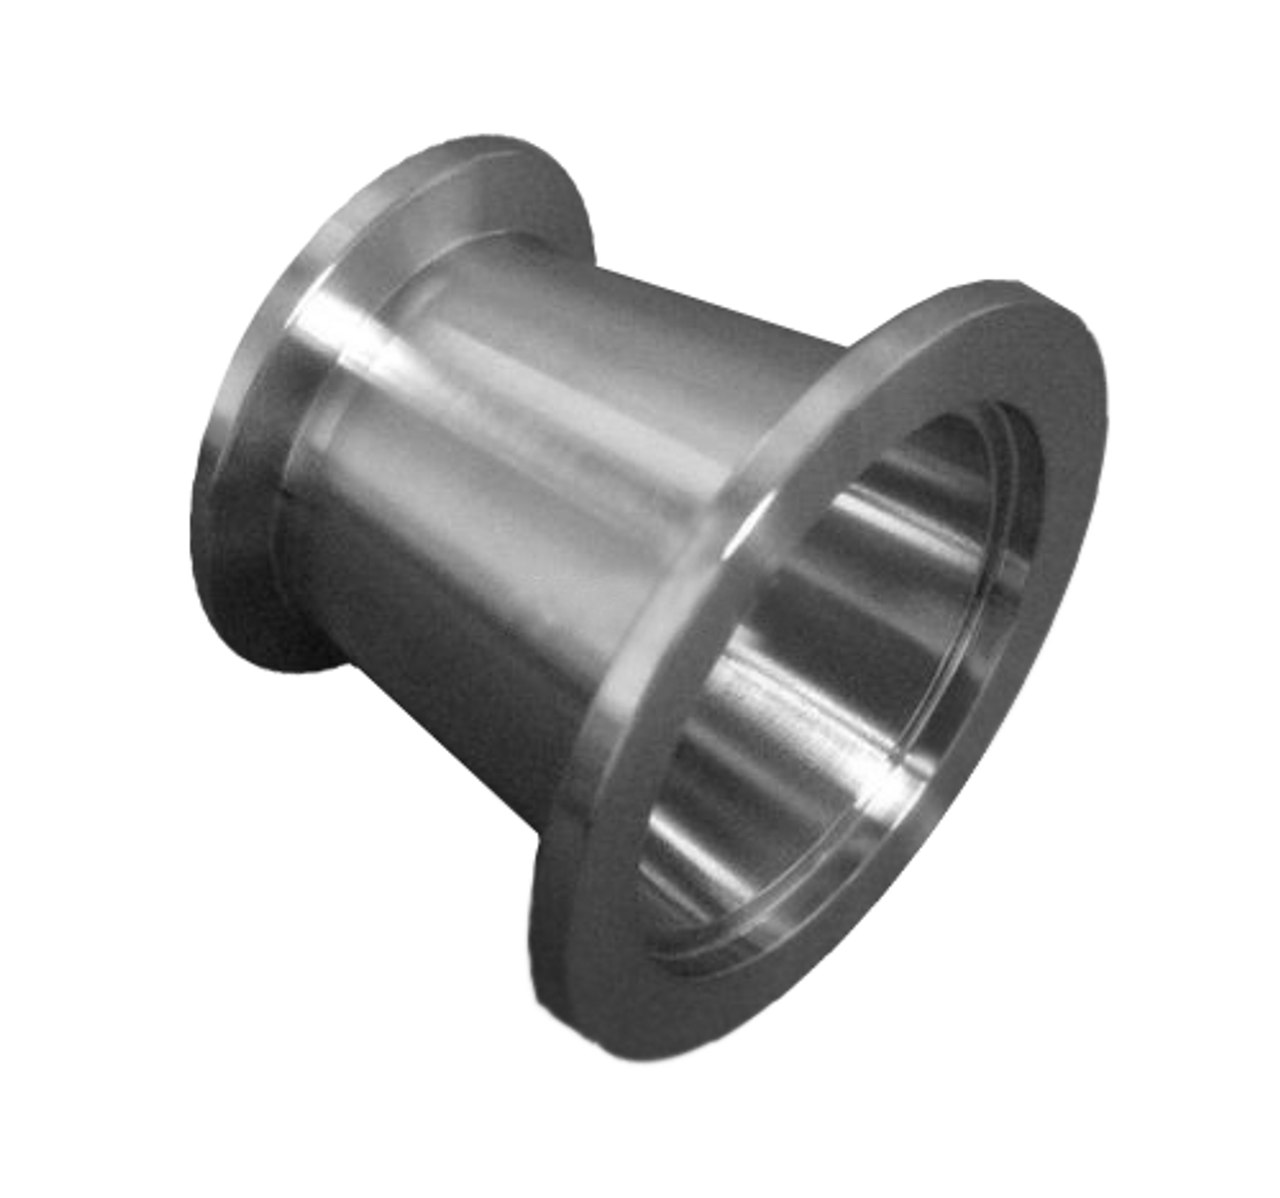 NW40 TO NW16 Conical Adapter 304 Stainless Steel